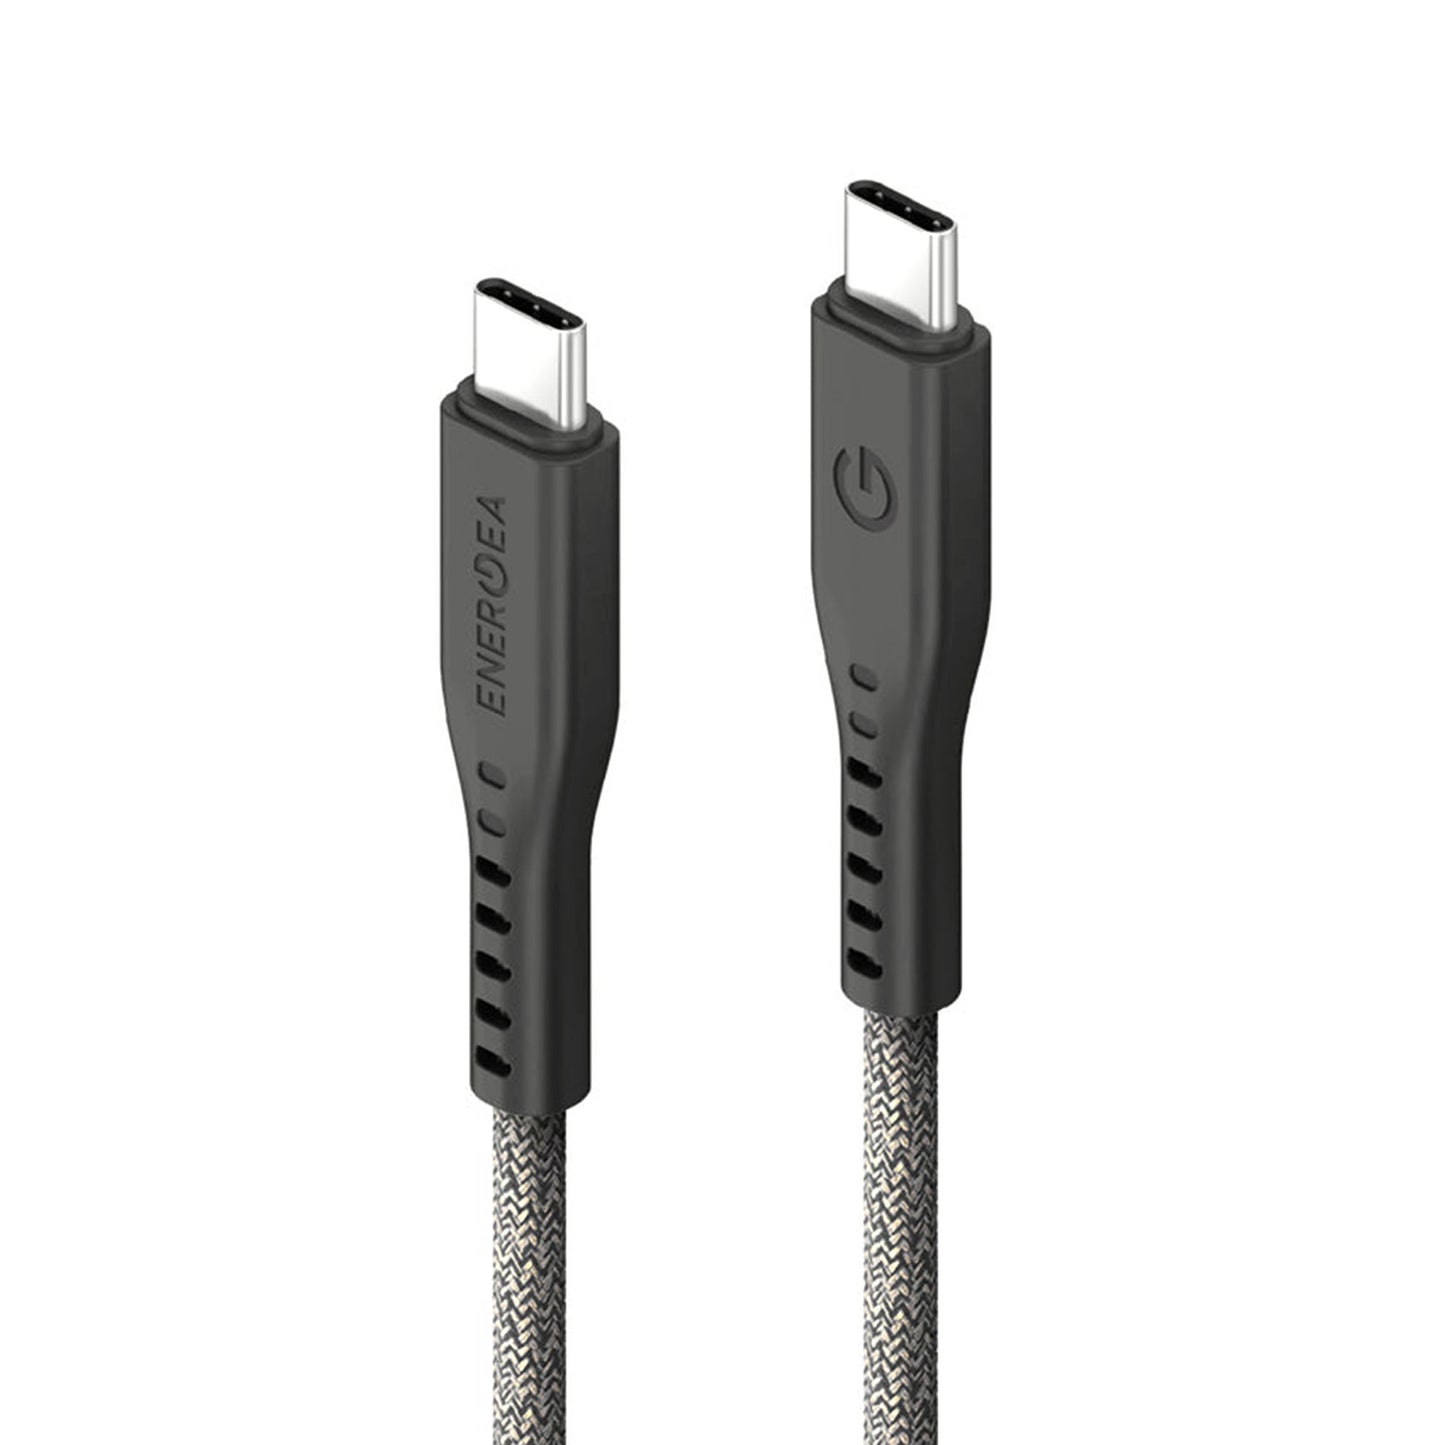 ENERGEA Flow 240w USB-C to USB-C PD Fast Charging Cable 1.5m - Black